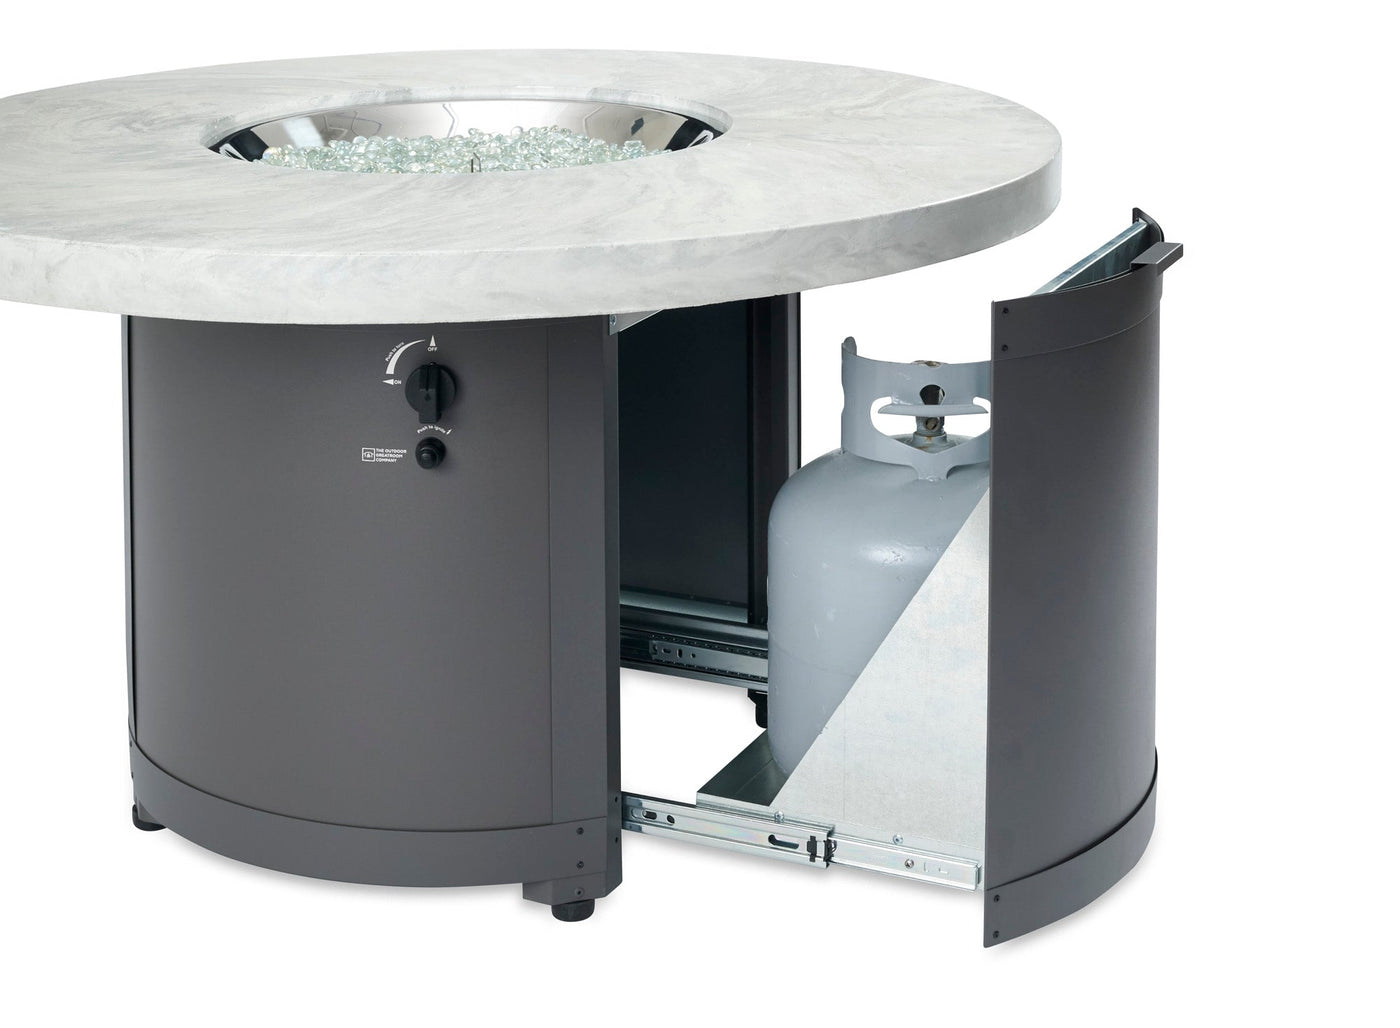 The Outdoor GreatRoom Company White Onyx Beacon Round Gas Fire Pit Table